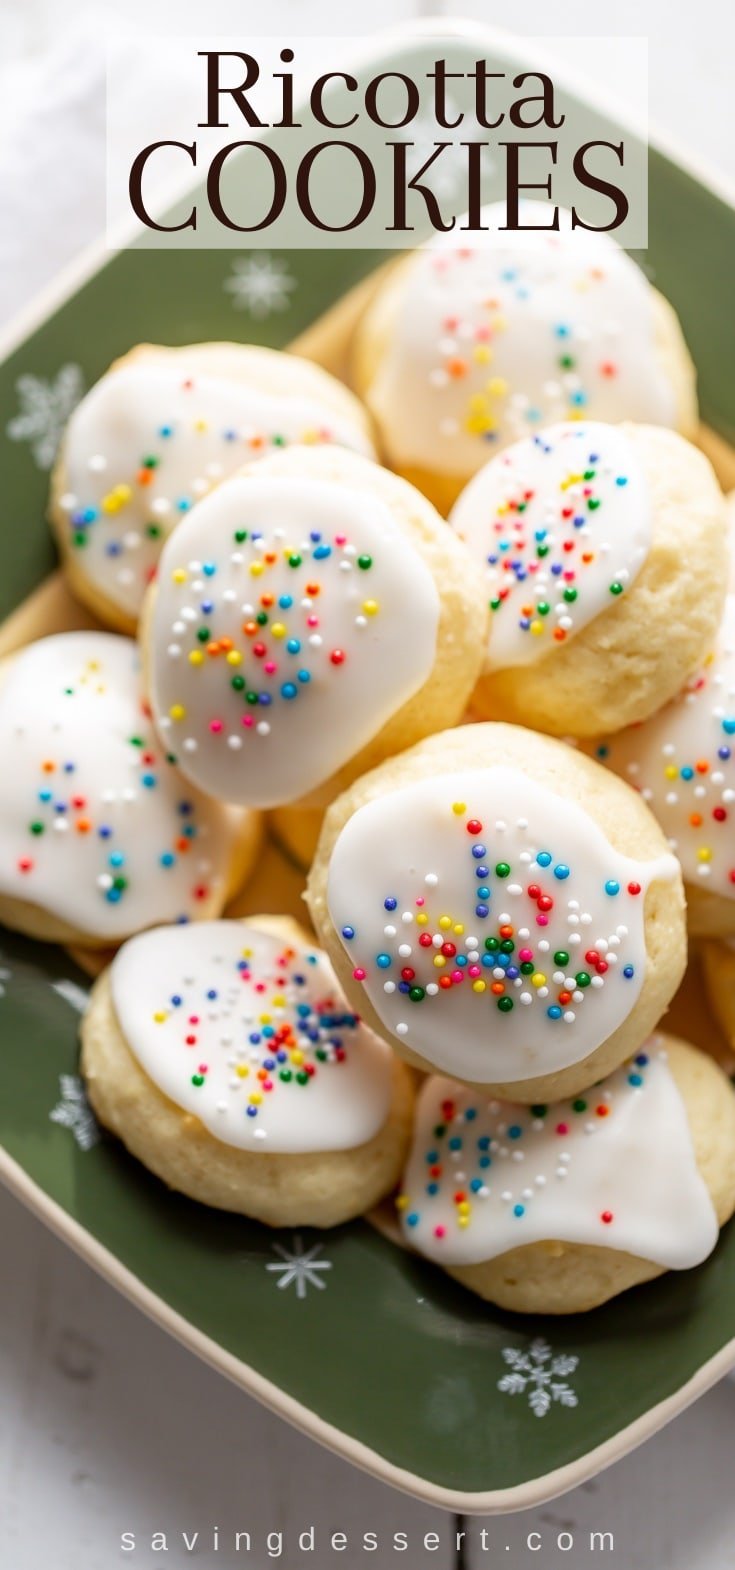 Soft lemon flavored Ricotta Cookies with a lemon glaze and colorful sprinkles